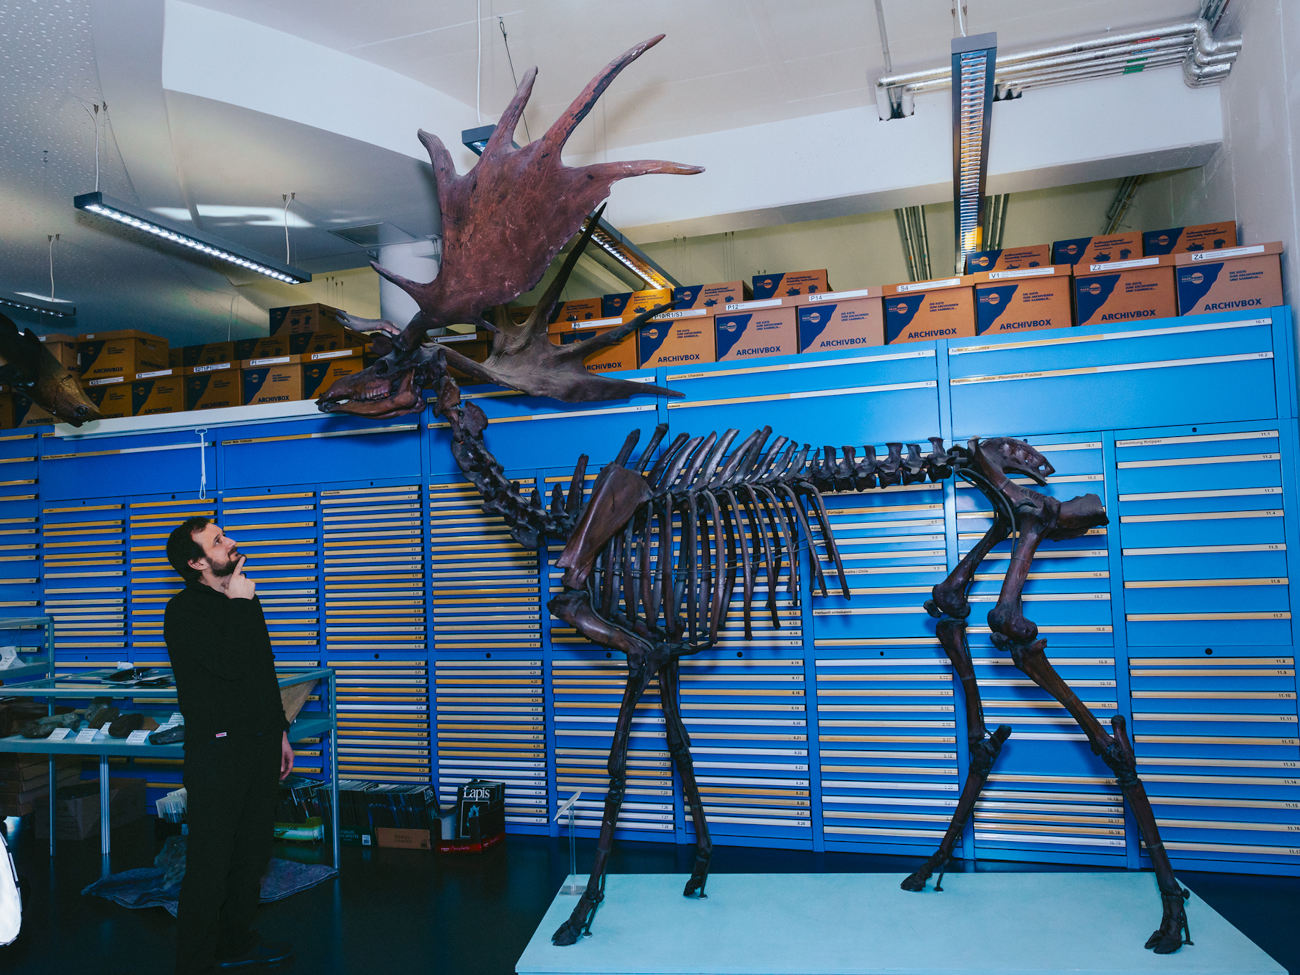 The skeleton of a giant deer stands in front of a blue cupboard. A person looks up at the deer's head.